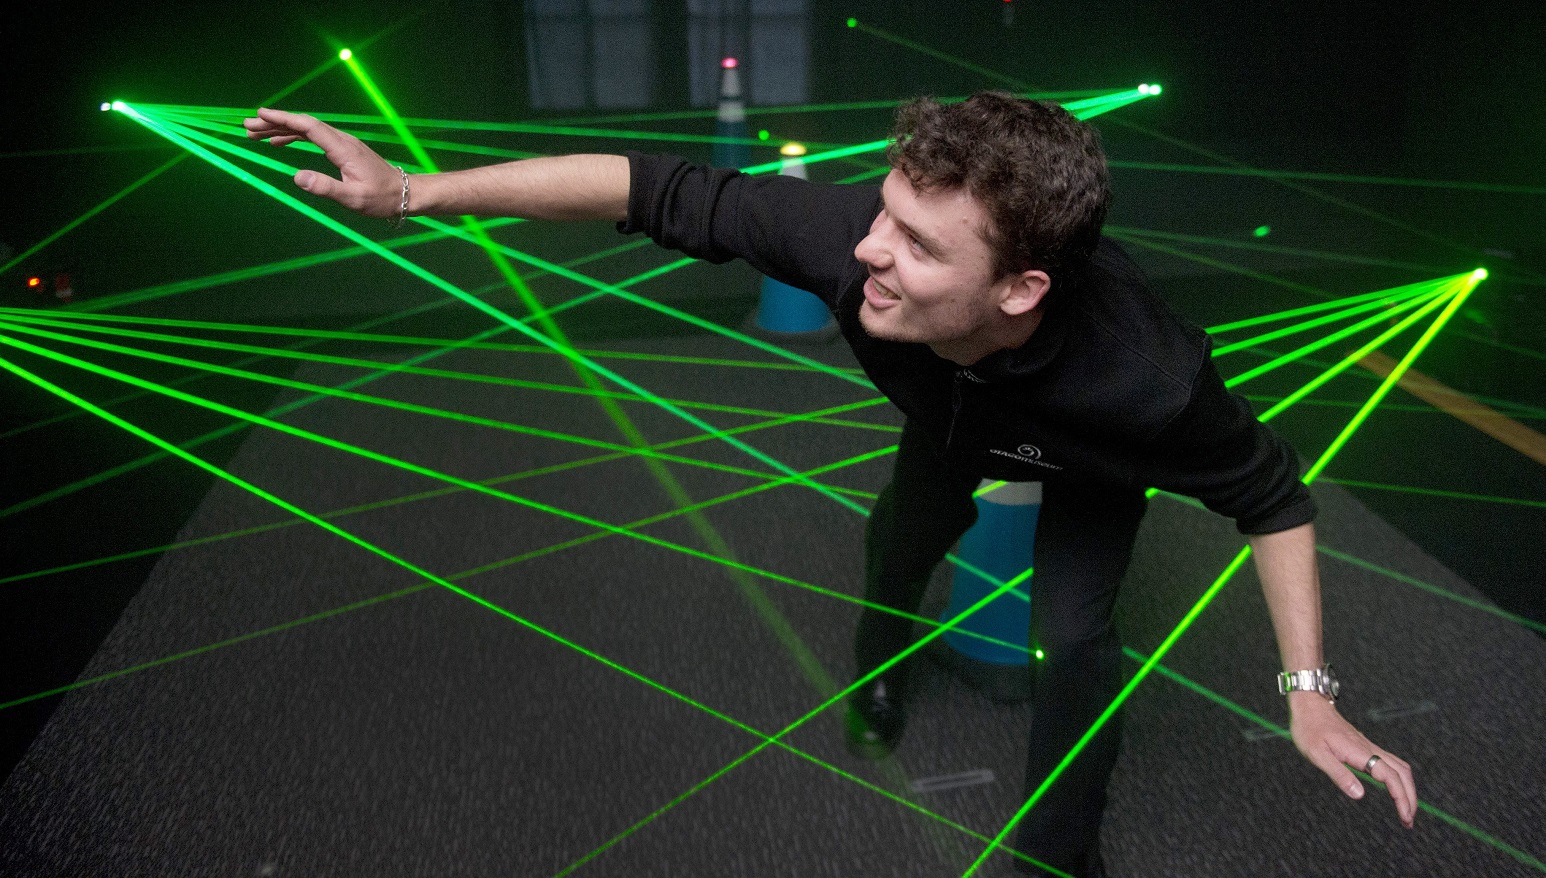 Otago Museum communicator Nathaniel Peacock showing off his stealthy moves at the Laser Maze in...